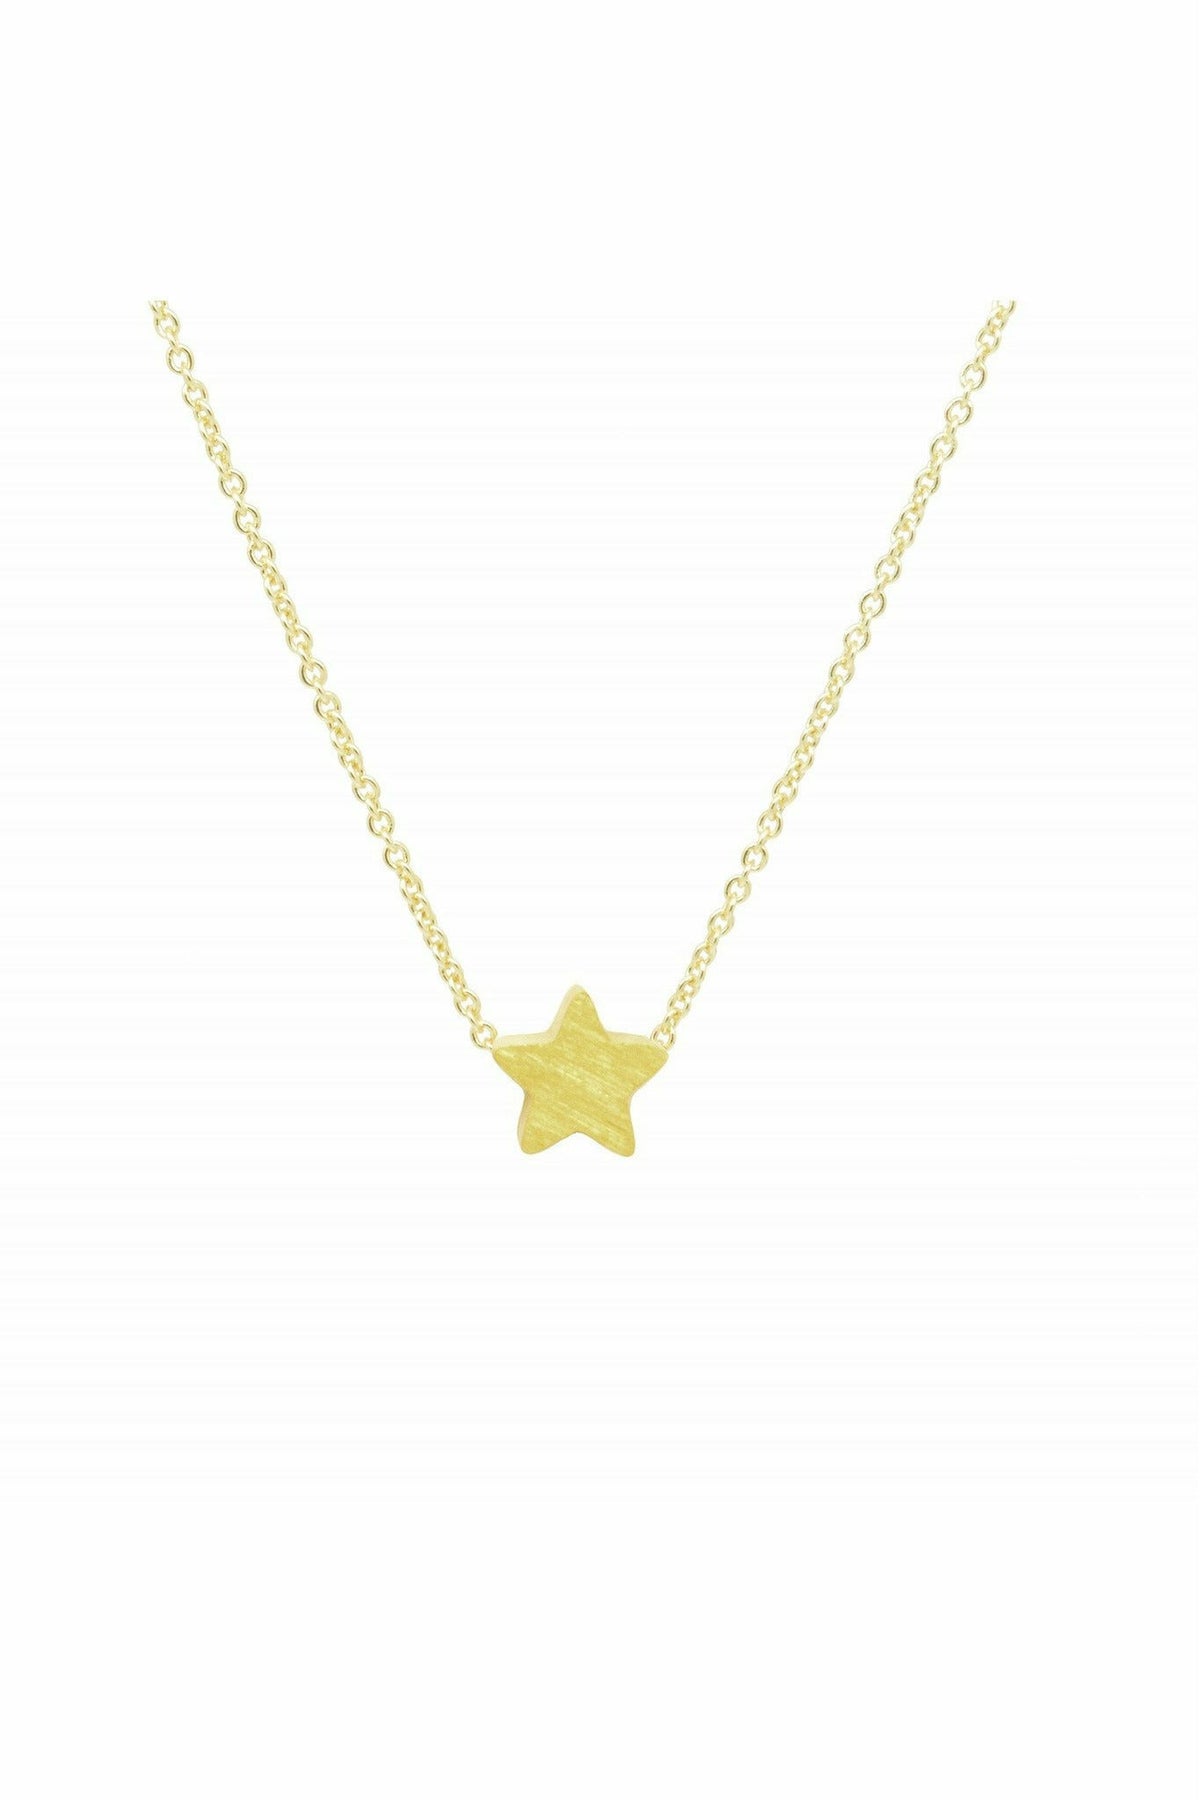 Star necklace in gold NLK15G